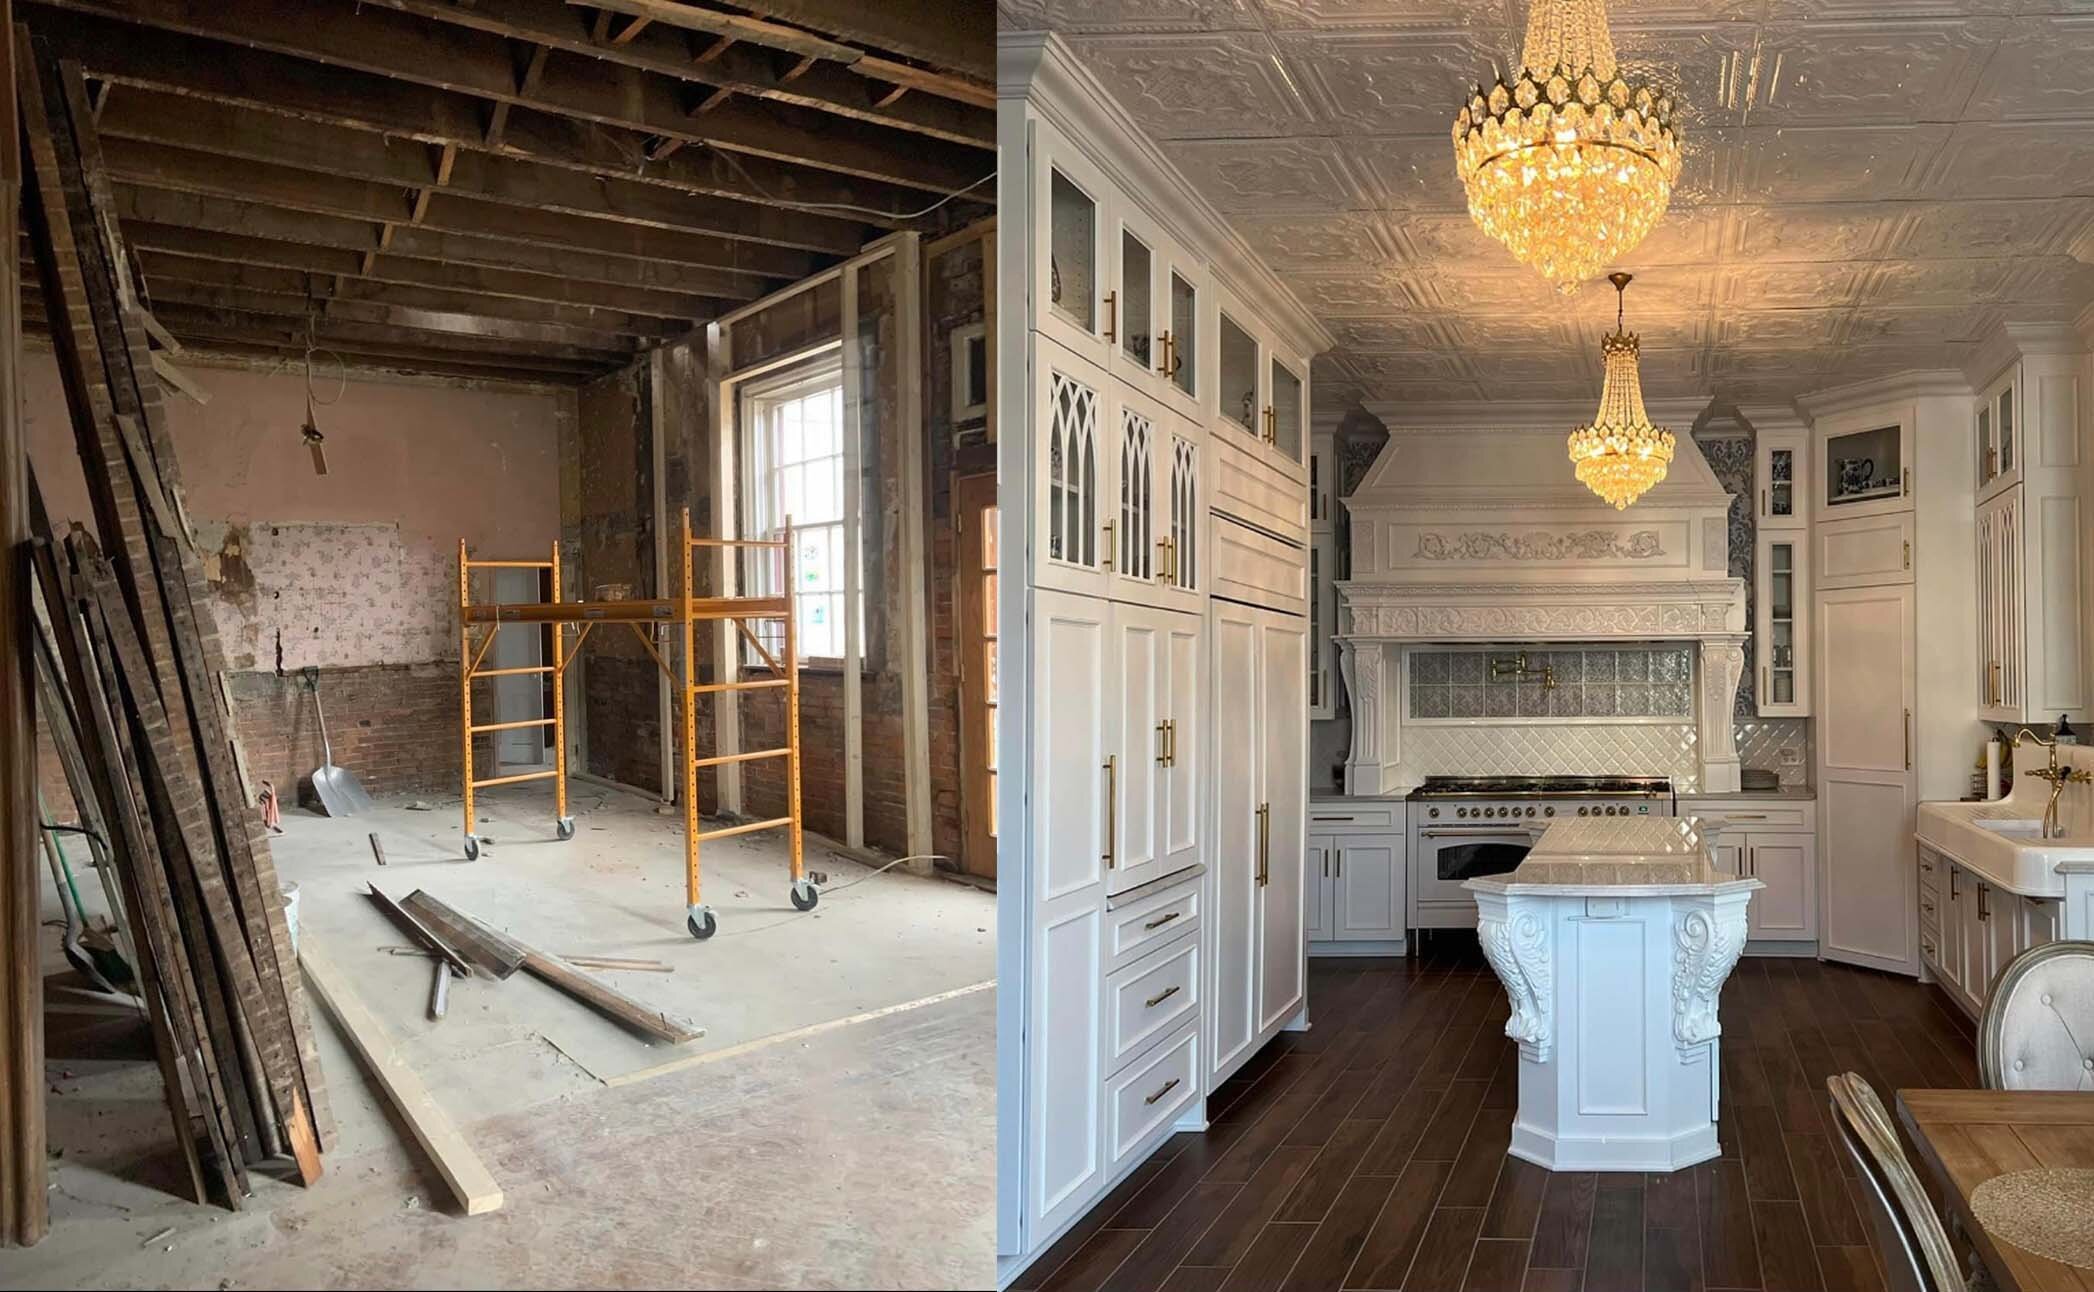 The Rauh's kitchen before (left) and after (right) renovations.